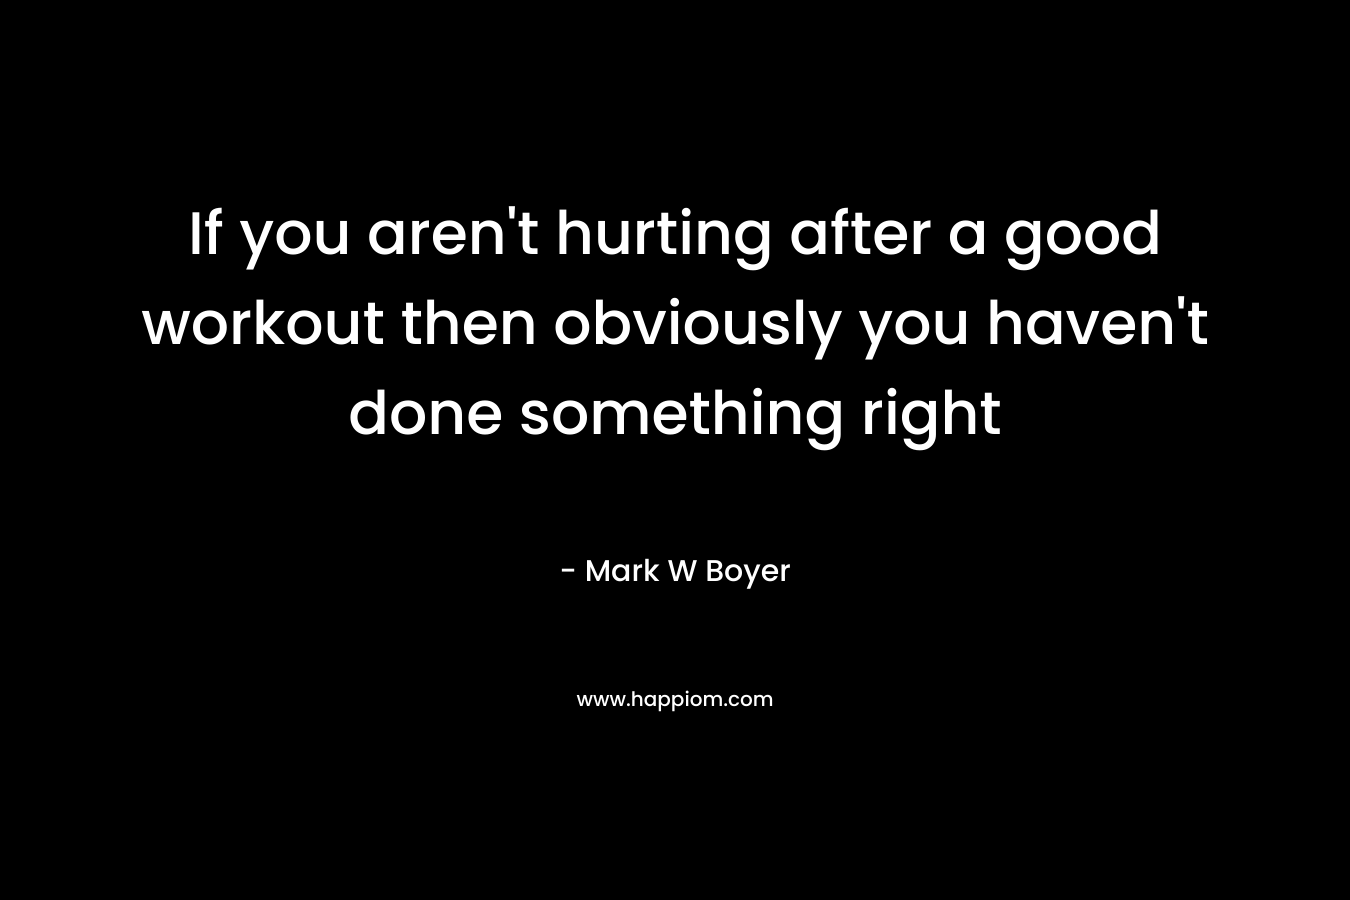 If you aren't hurting after a good workout then obviously you haven't done something right